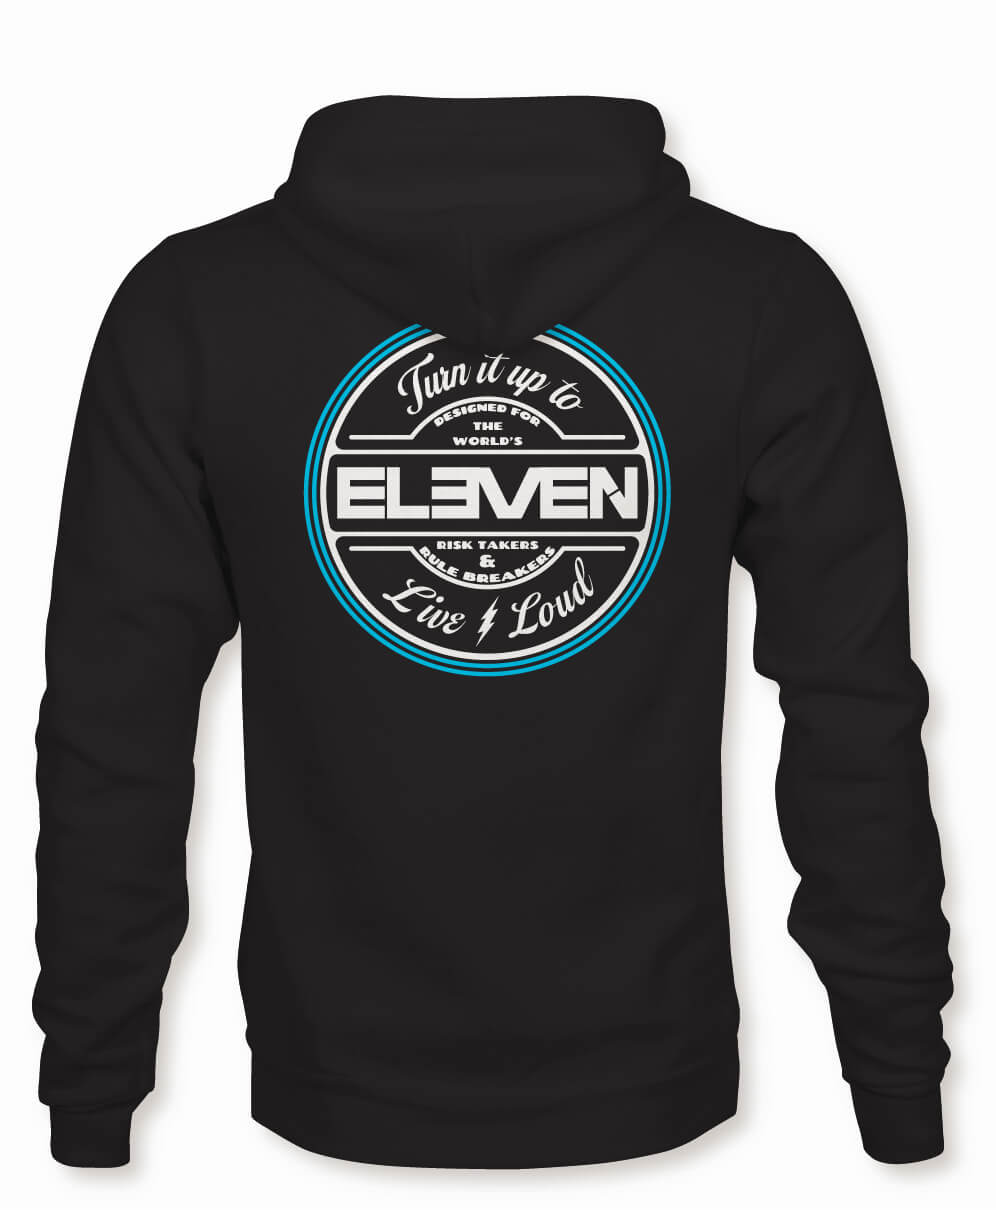 TURN IT UP TO ELEVEN · LIVE LOUD WHITE BLUE ROUND LOGO ON BLACK EVENTIDE HOODIE - ELEVEN